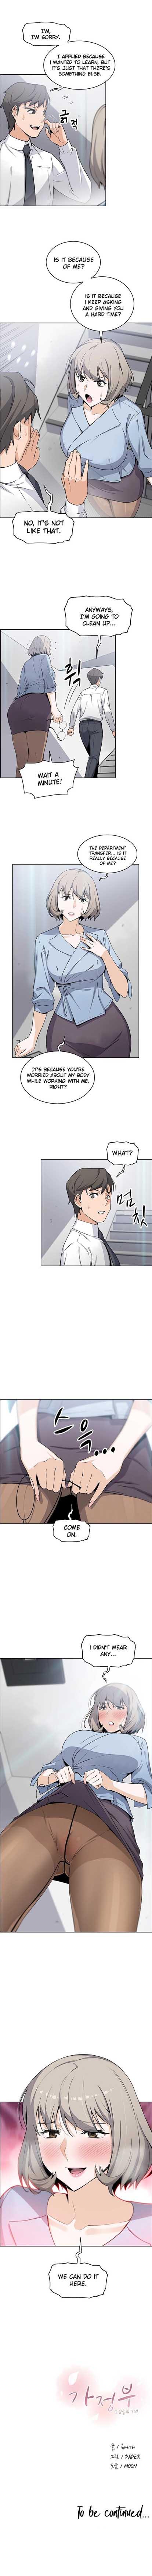 Housekeeper [Neck Pillow, Paper] Ch.49/49 [English] [Manhwa PDF] Completed 272